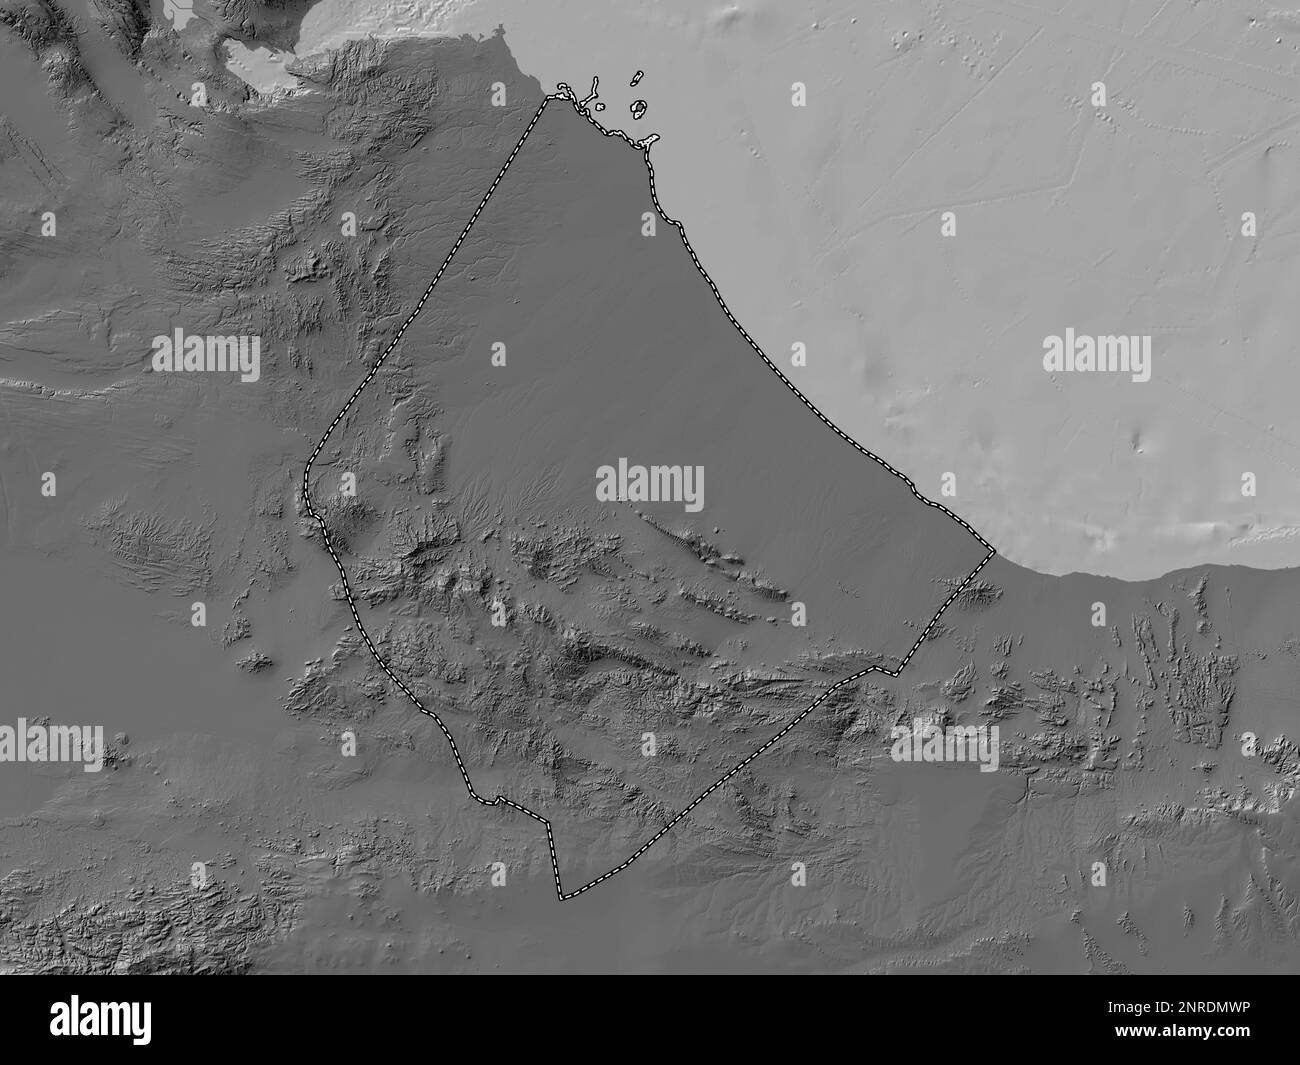 Awdal, region of Somalia. Bilevel elevation map with lakes and rivers Stock Photo